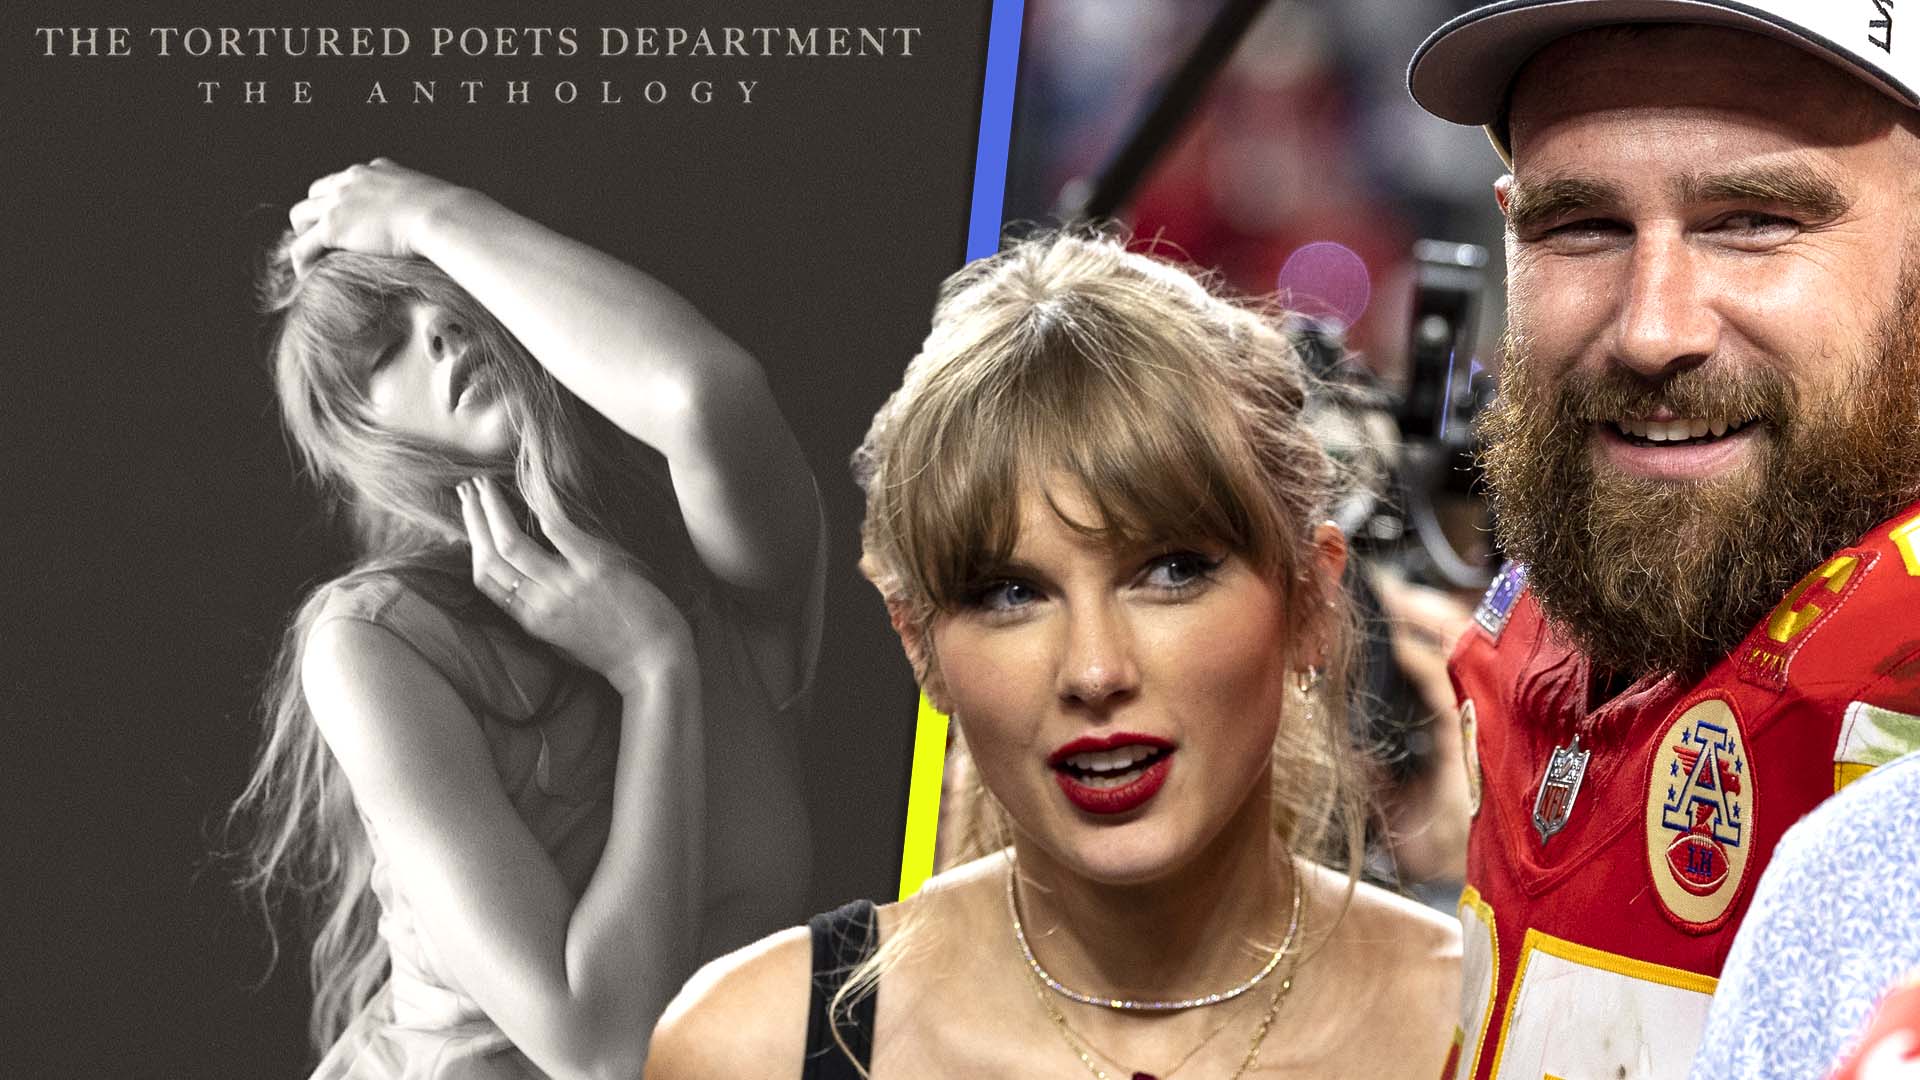 The Kansas City Chiefs player—who has been dating Taylor Swift since last summer—isn't fighting the alchemy after her new album, The Tortured Poets Department, seemingly referenced their sweet romance.